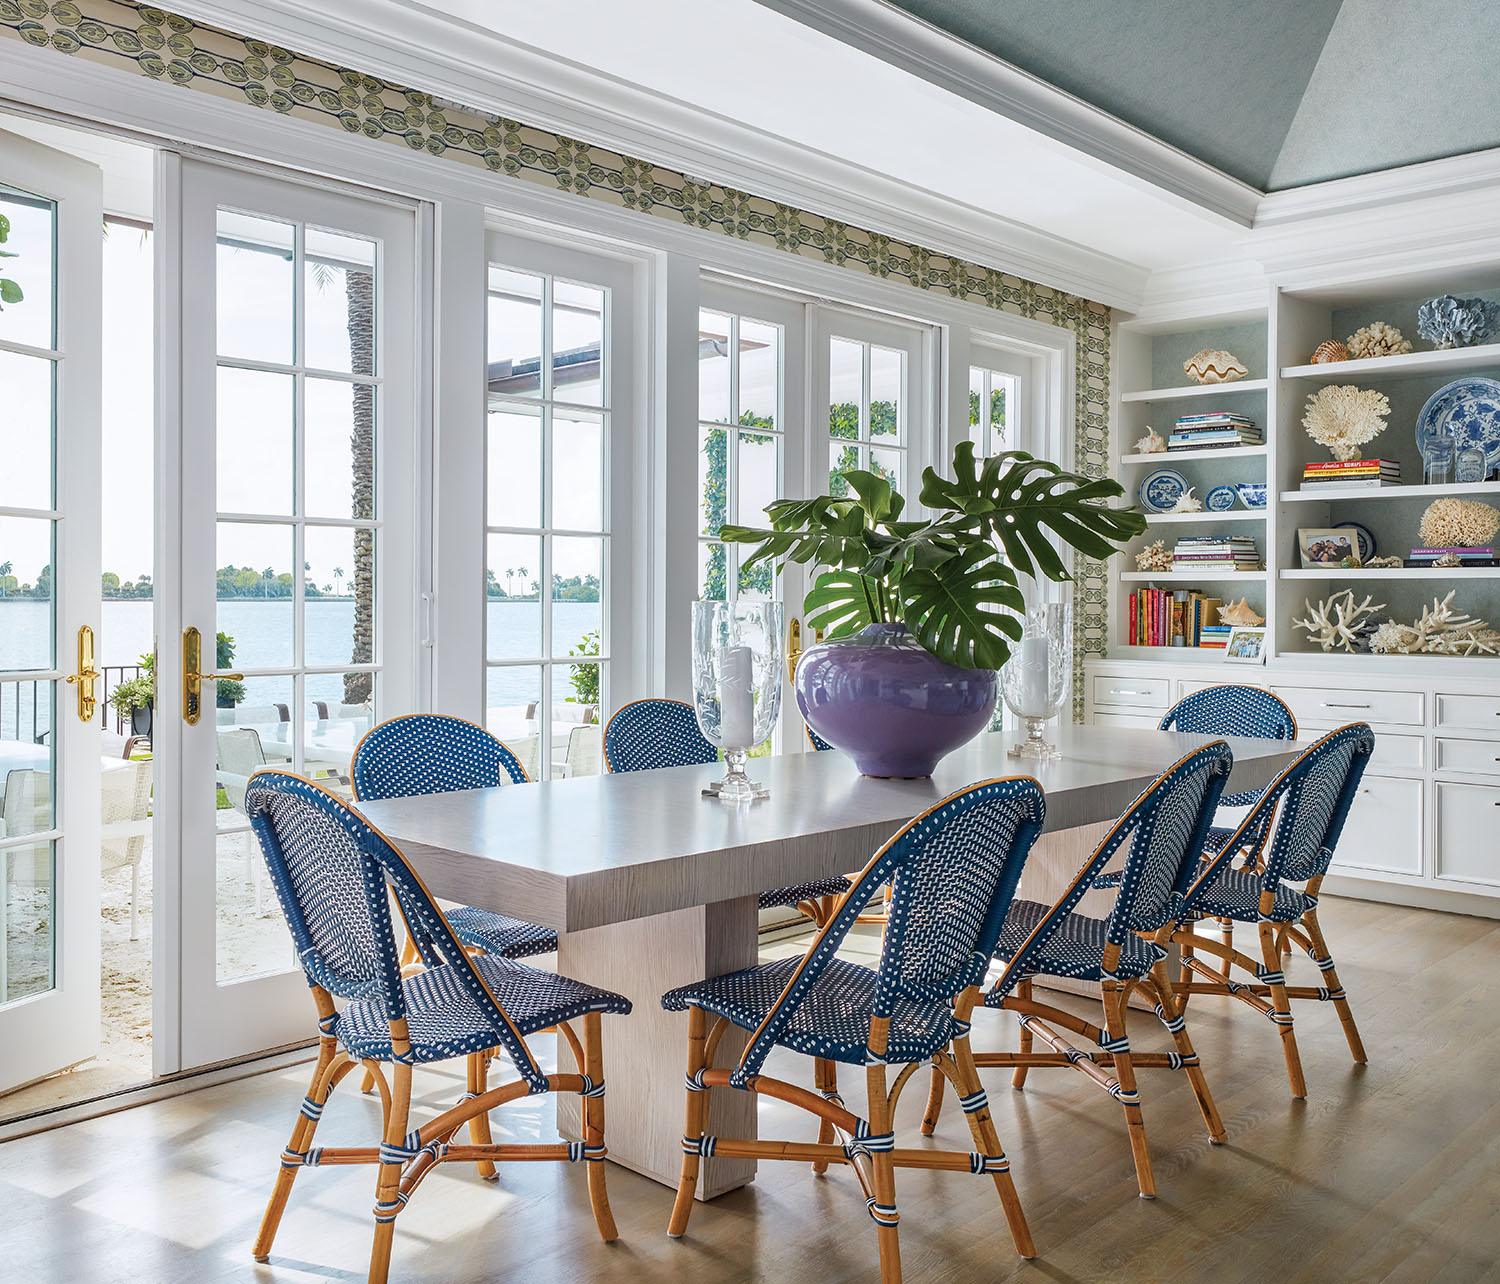 Blue dining chairs around a white table in front of french doors.